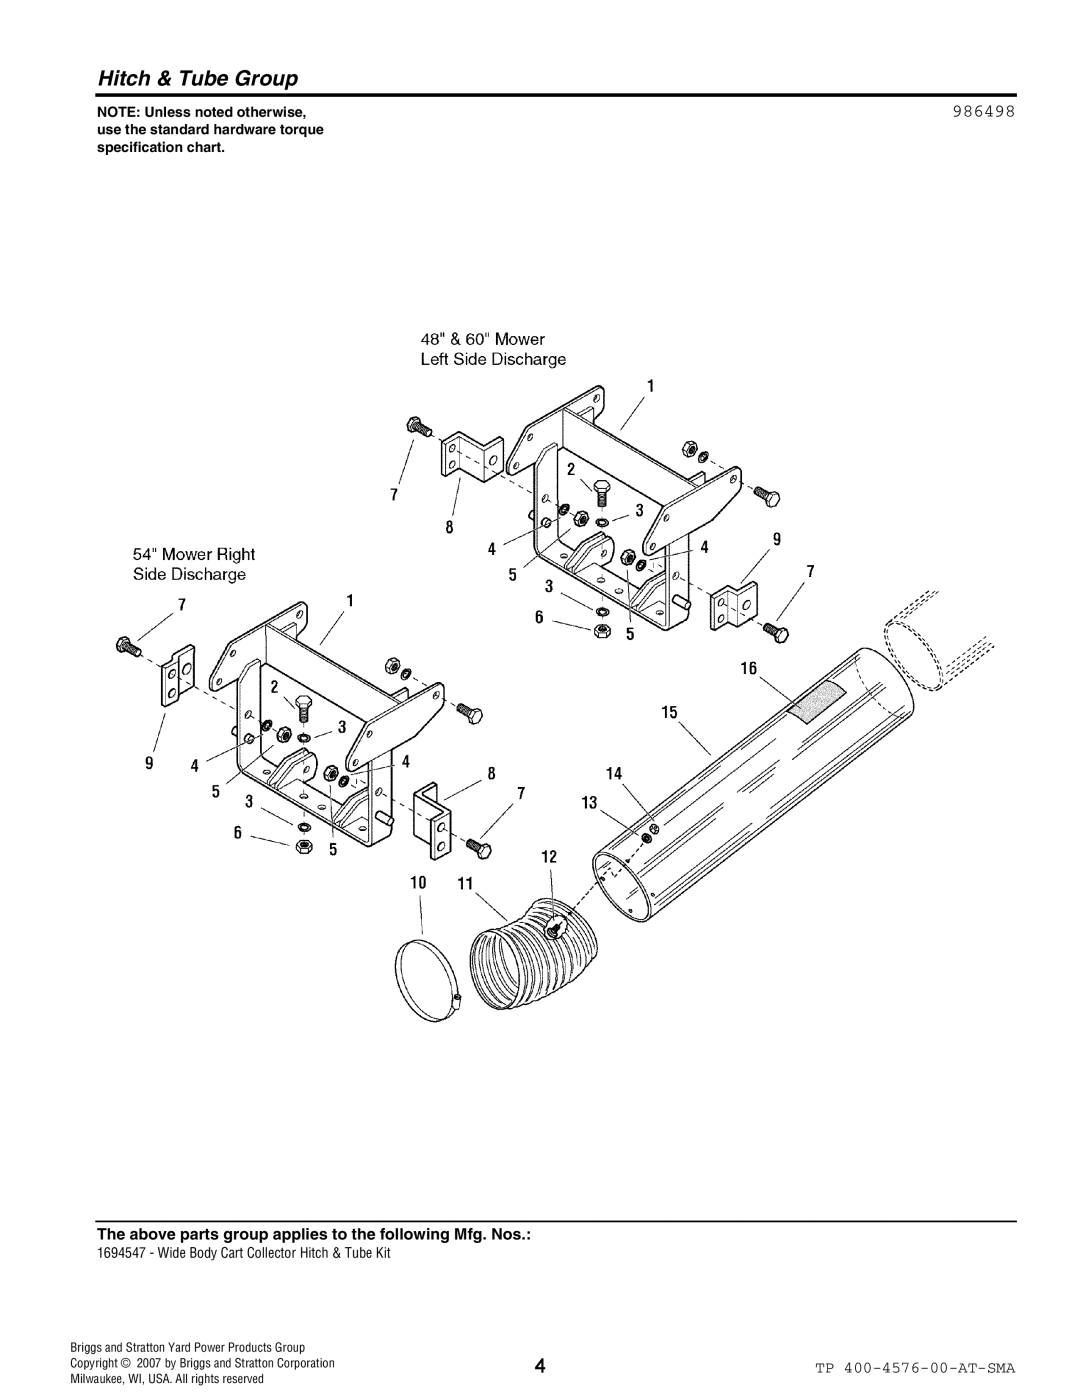 Snapper 4576 manual Hitch & Tube Group, 986498, NOTE Unless noted otherwise, Briggs and Stratton Yard Power Products Group 